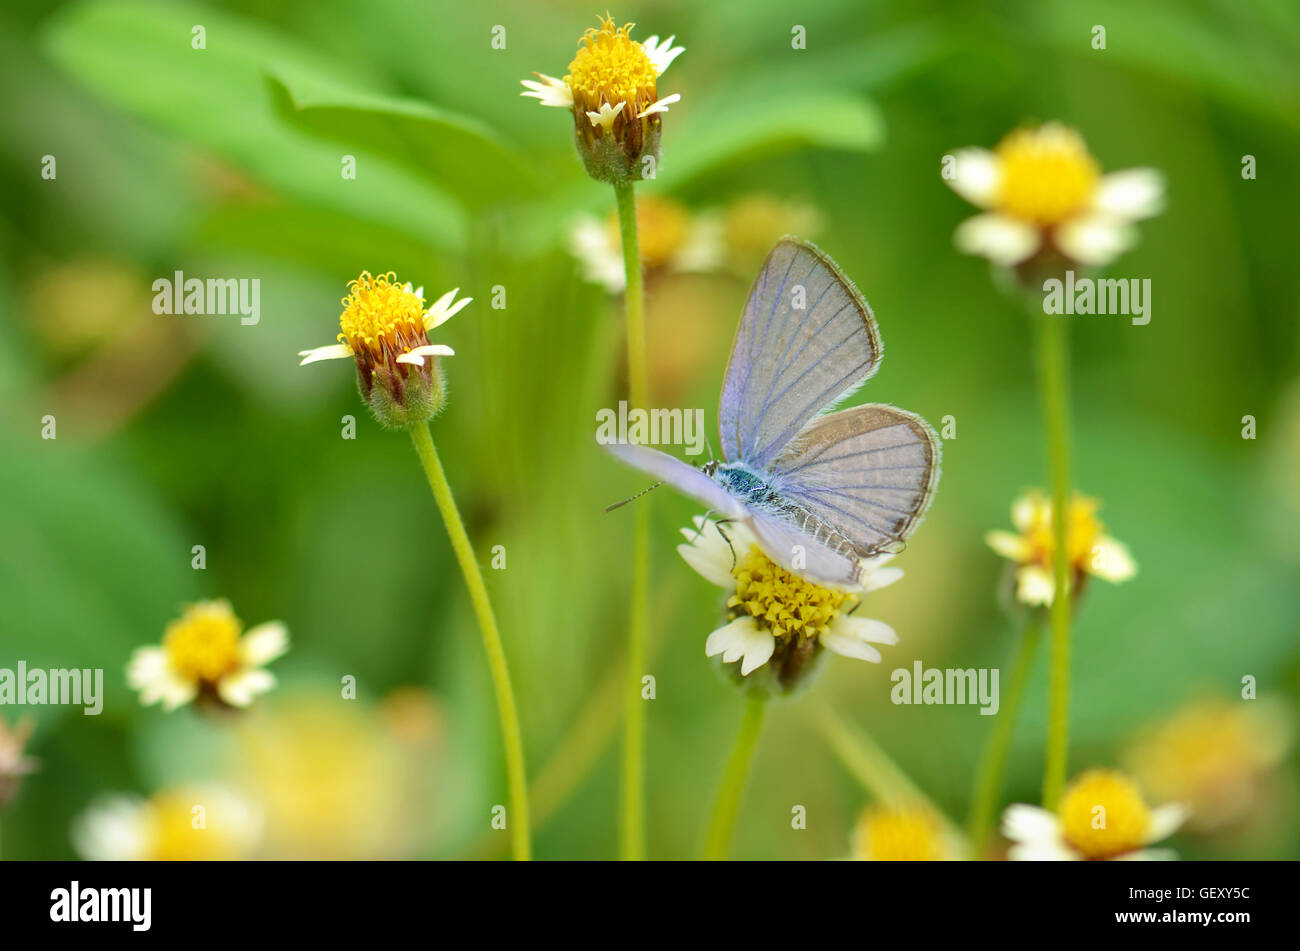 Small butterfly on Mexican daisy flower with natural green background. Stock Photo